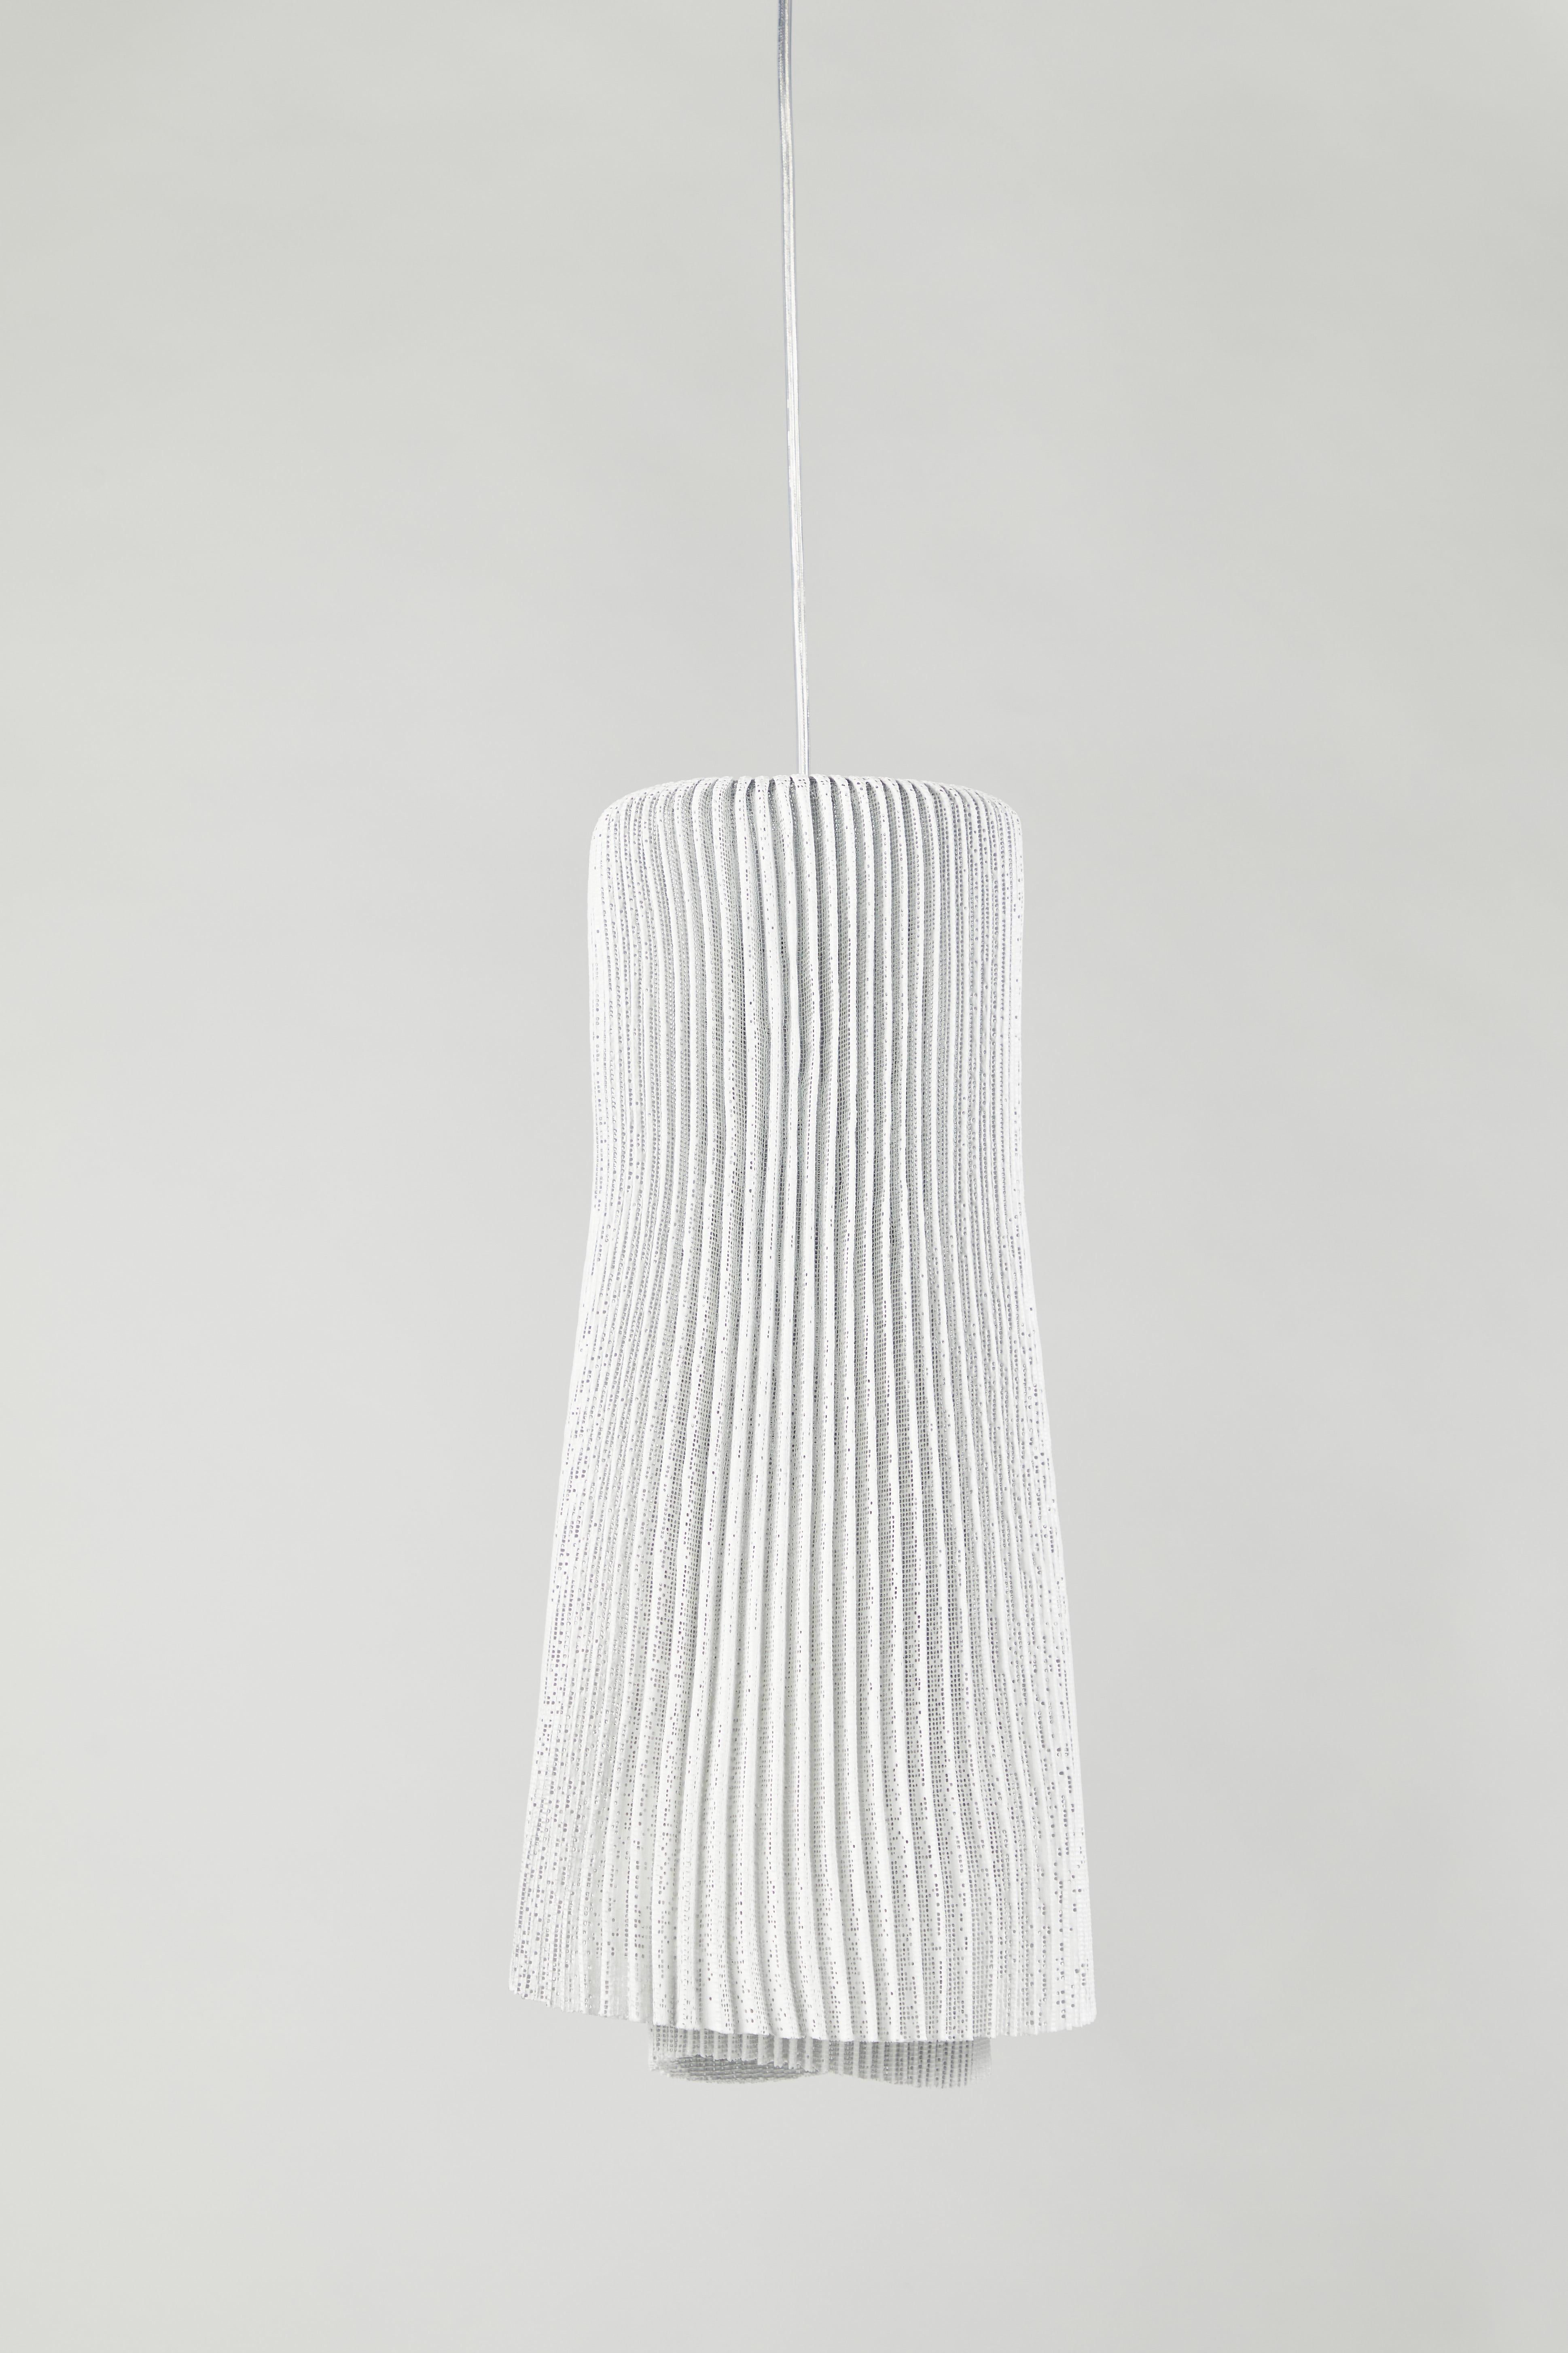 Set of four Tempo Andante pendant lights. Handmade in Spain, the Tempo Andante pendant light by Arturo Alvarez is a delicate and charming fixture, its seemingly soft and flowing shade is composed of carefully rolled stainless steel mesh. Crafted in